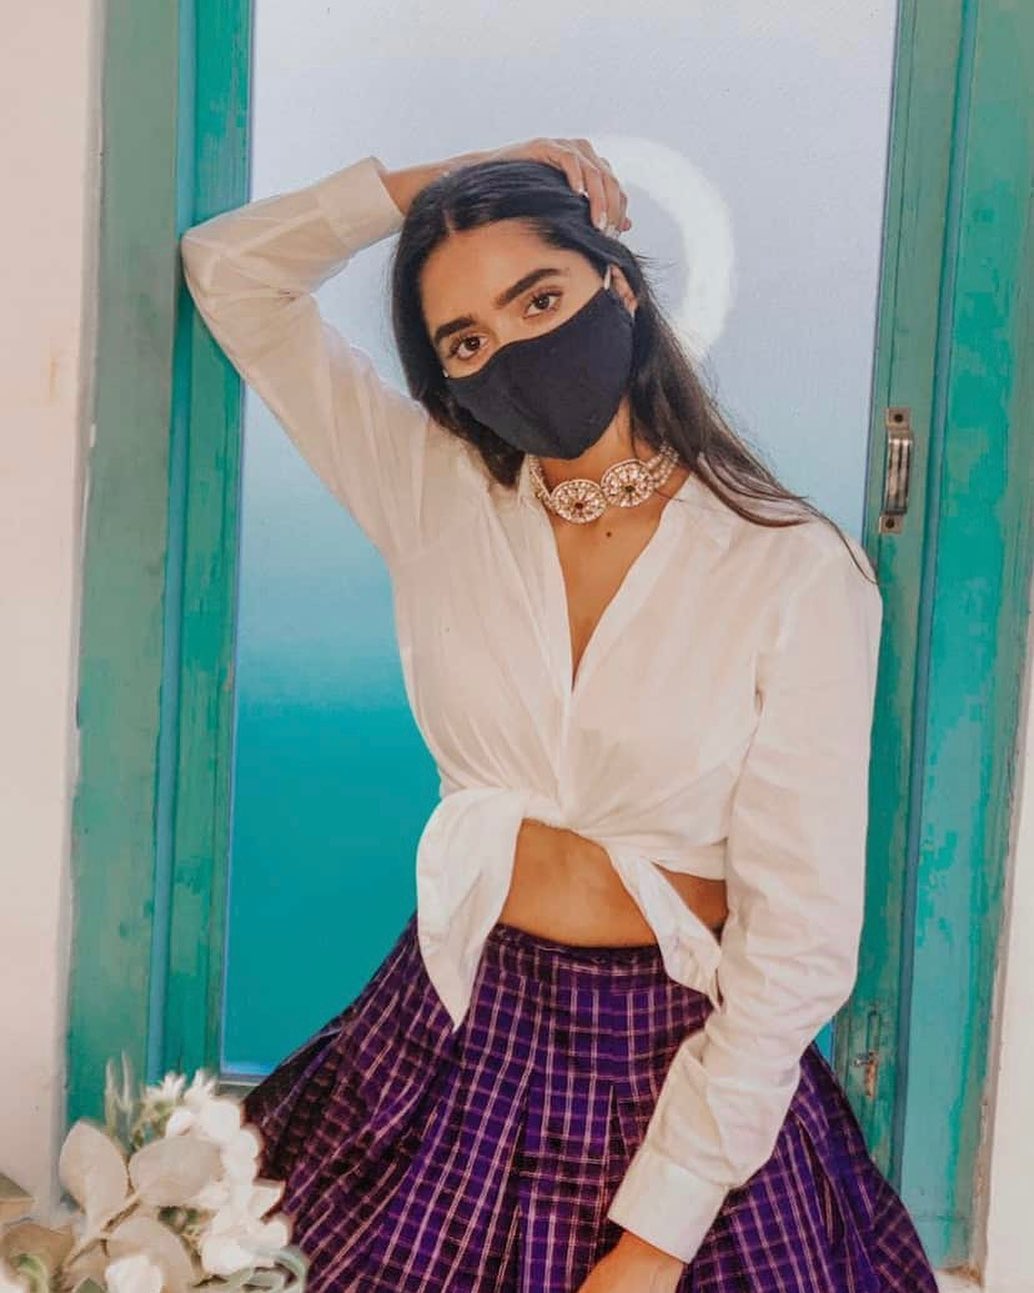 MYNTRA - Pair your checkered skirt with a basic shirt, add a statement jewellery piece and just watch the magic happen!
📸 @hasiniyellareddy
Look up similar product code:  12332738 , 12332748 (Skirt) /...